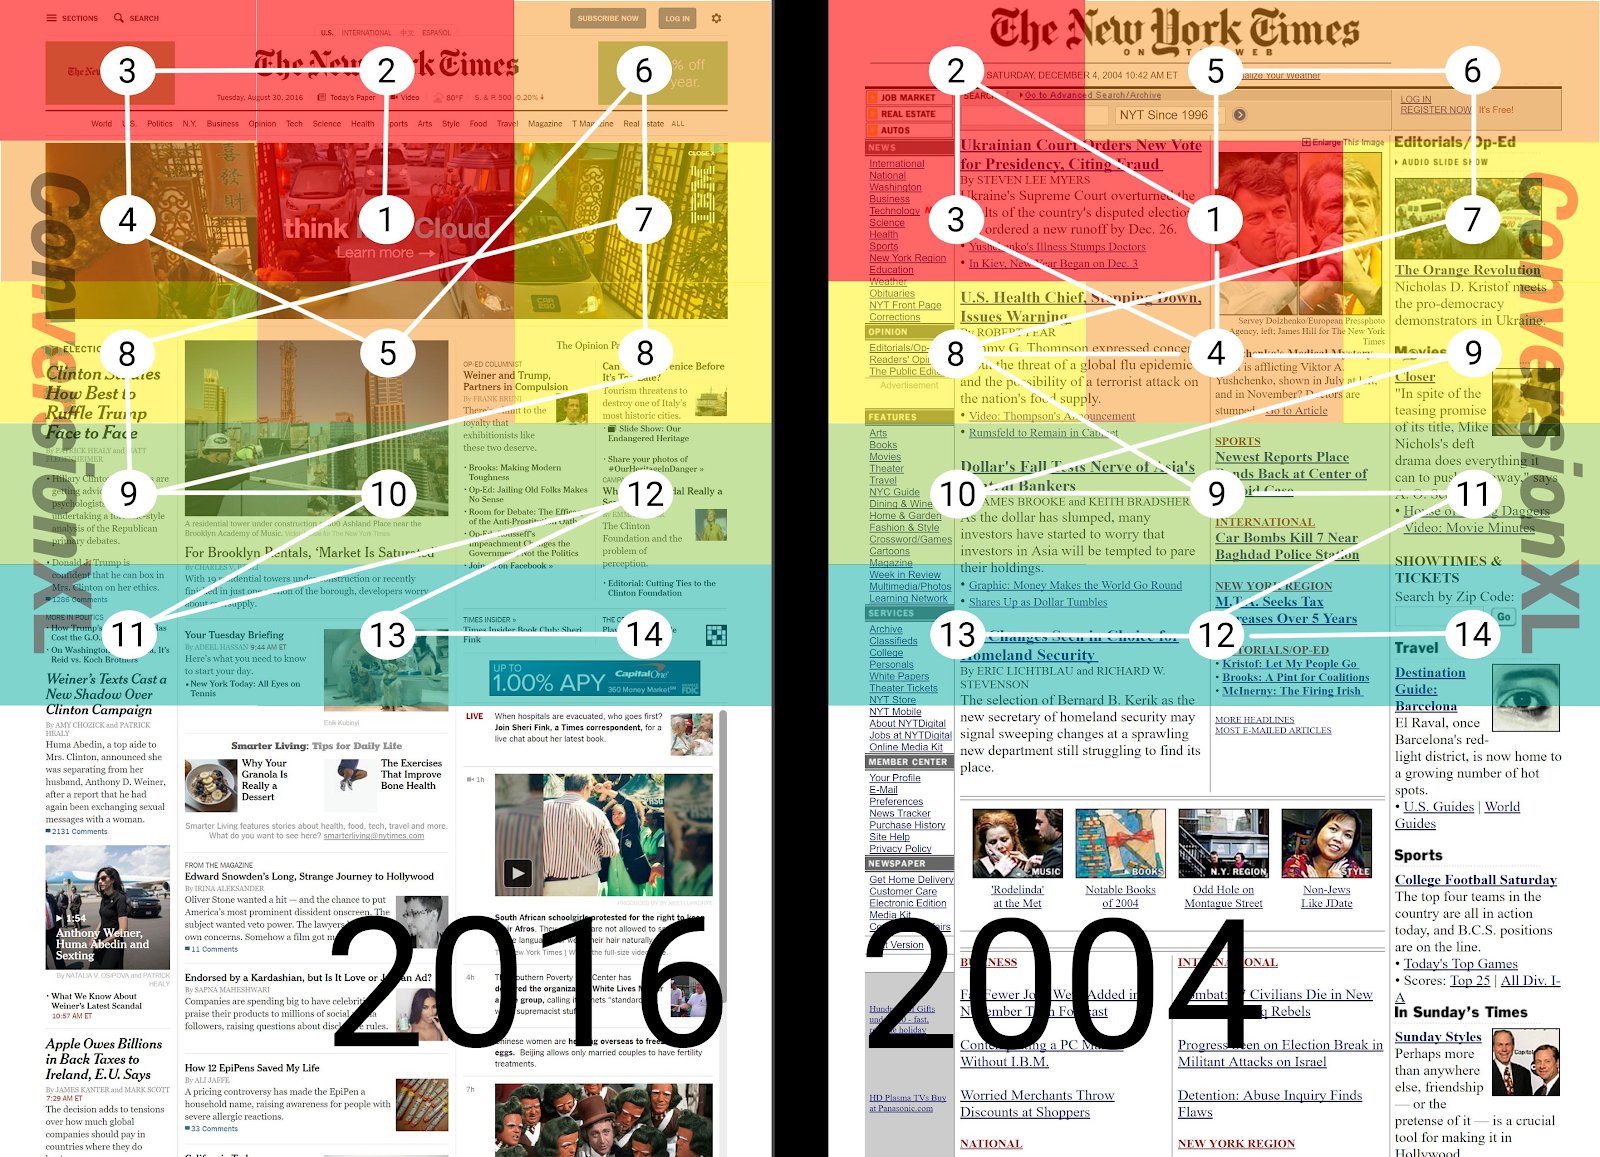 New York Times comparative study of scroll behavior from 2004 to 2016.